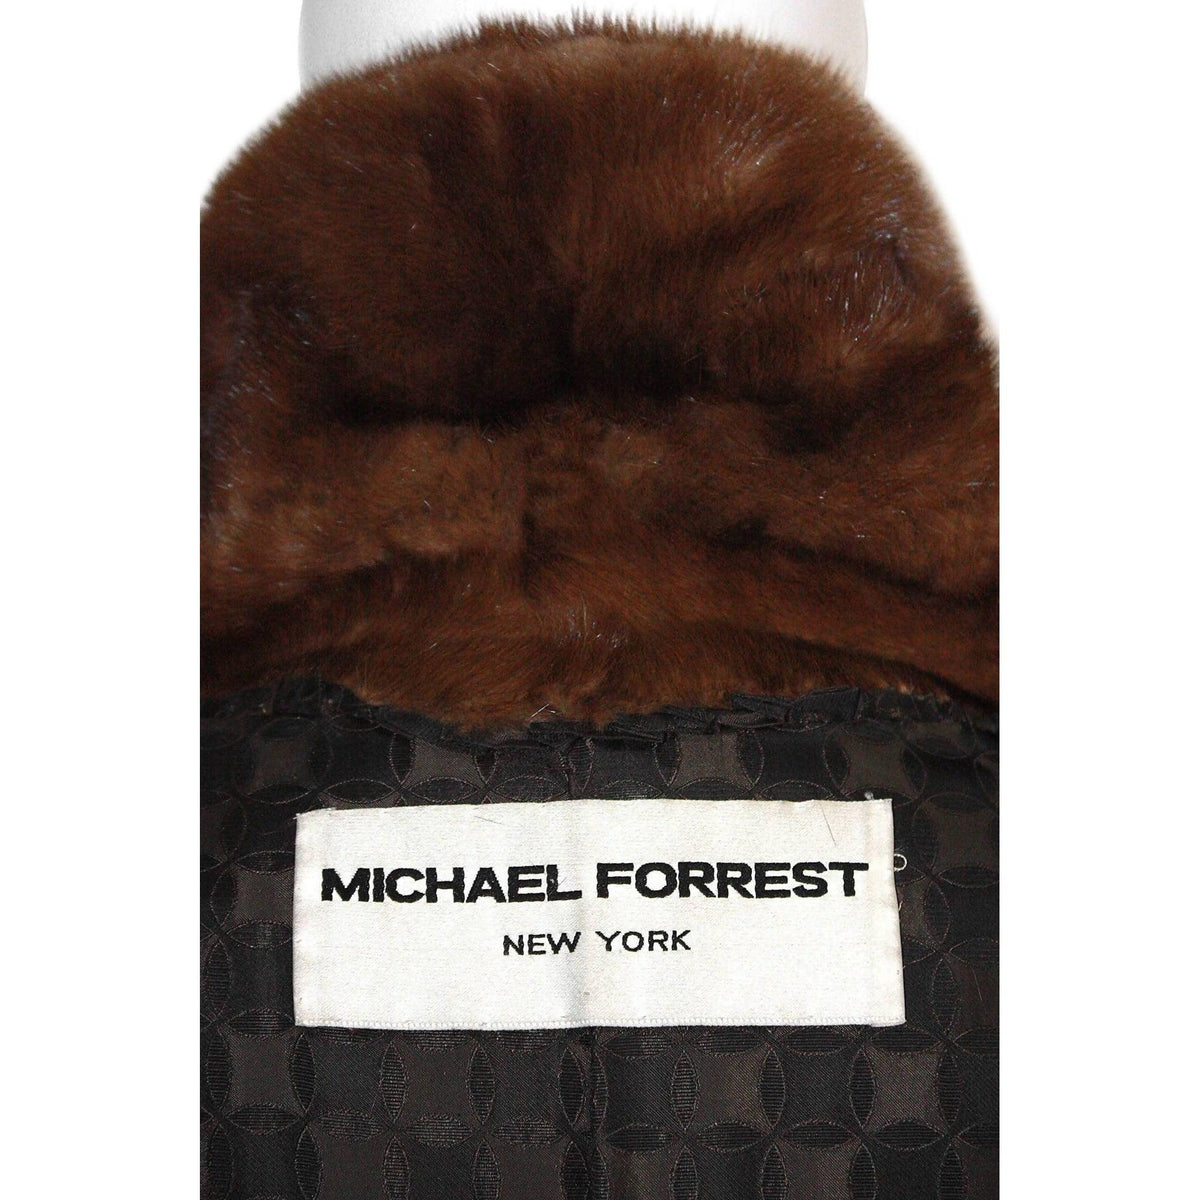 Pre-Owned NORMAN NORELL FOR MICHAEL FORREST 1970's Natural Mink Coat - theREMODA